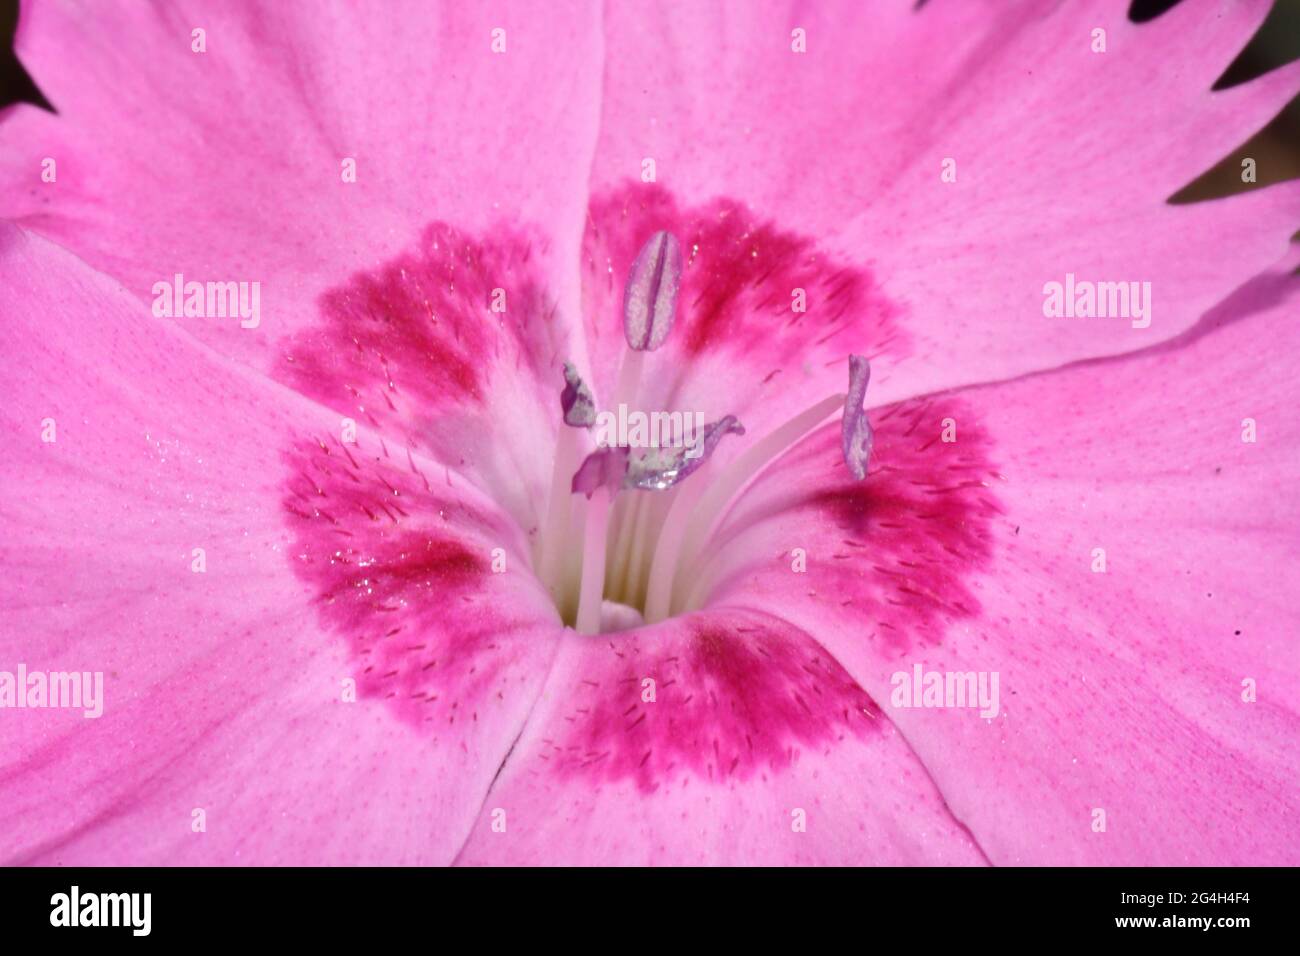 Pink Dianthus,close-up,showing the Stamen consisting of the filament with the Anther on its tip.Growing in a Somerset garden. Stock Photo